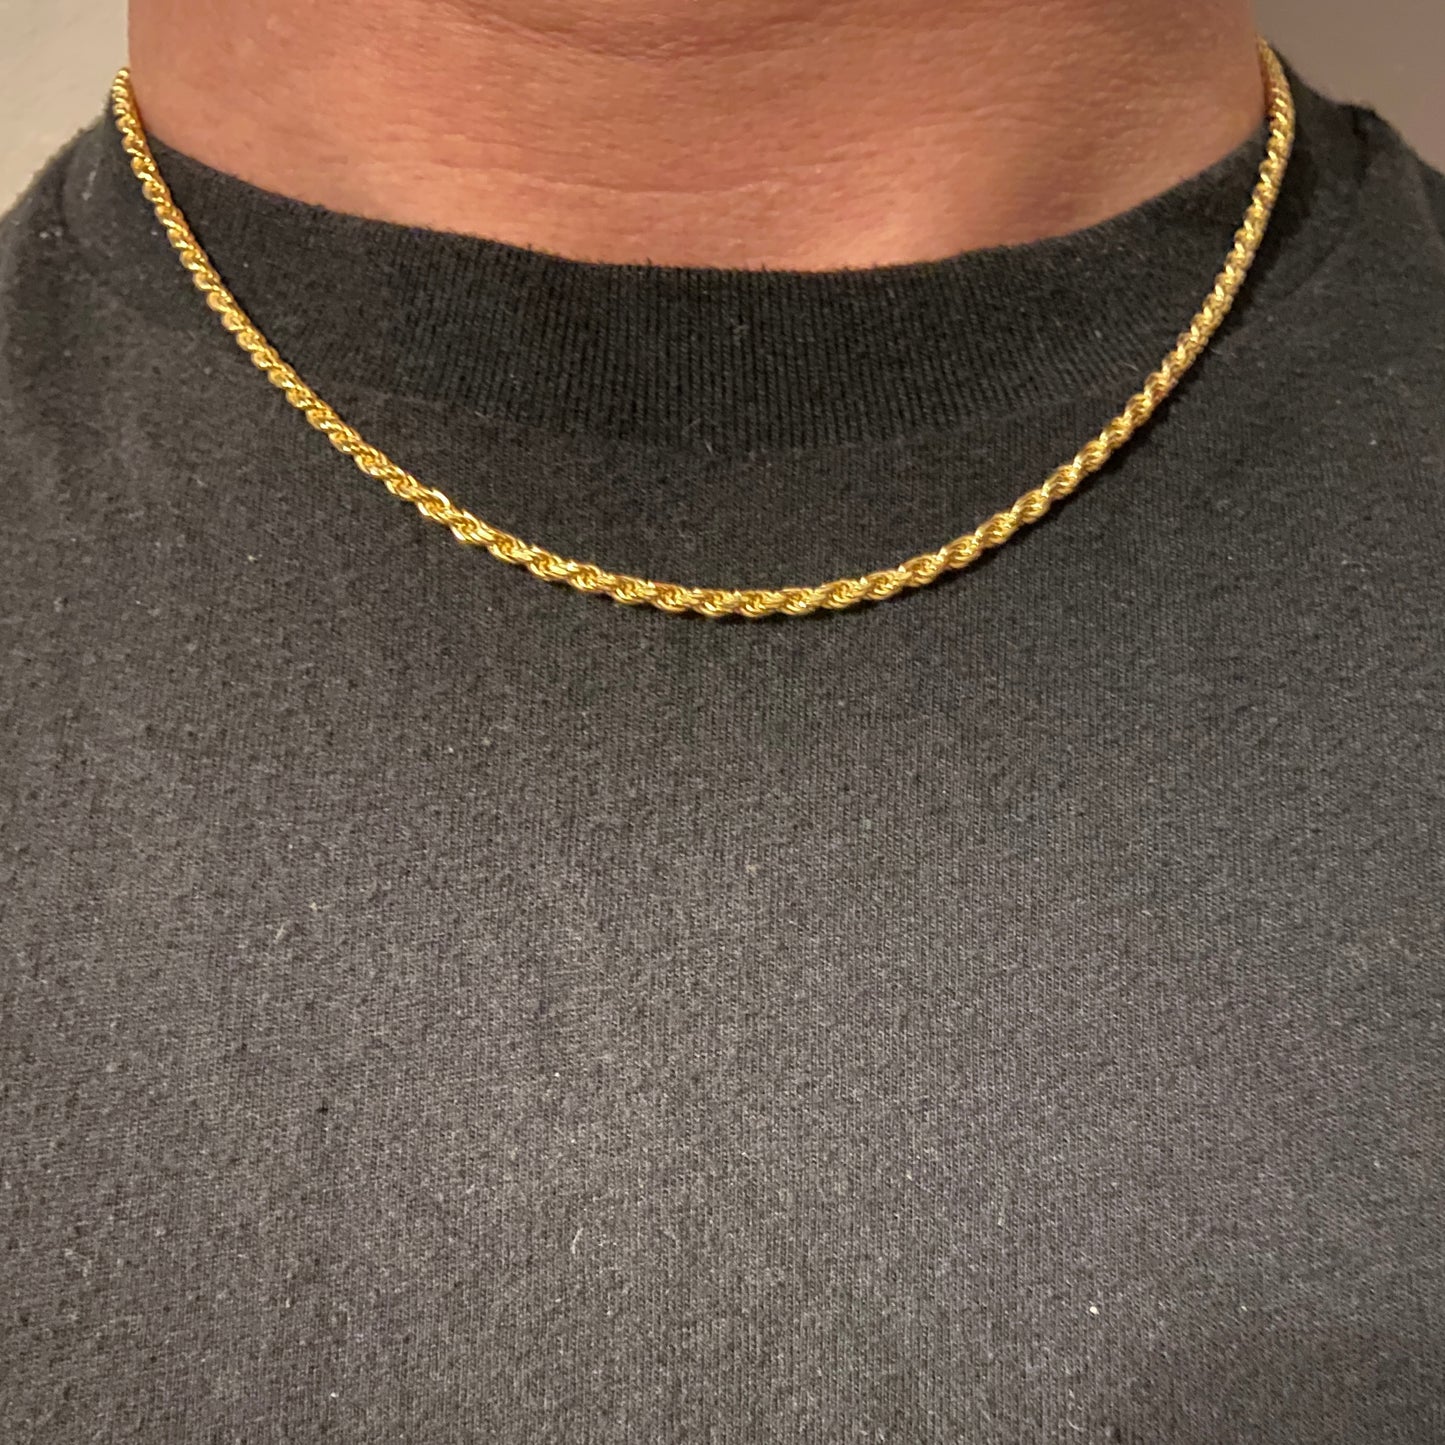 Solid Real 10k Gold Rope Chain 18in 3mm